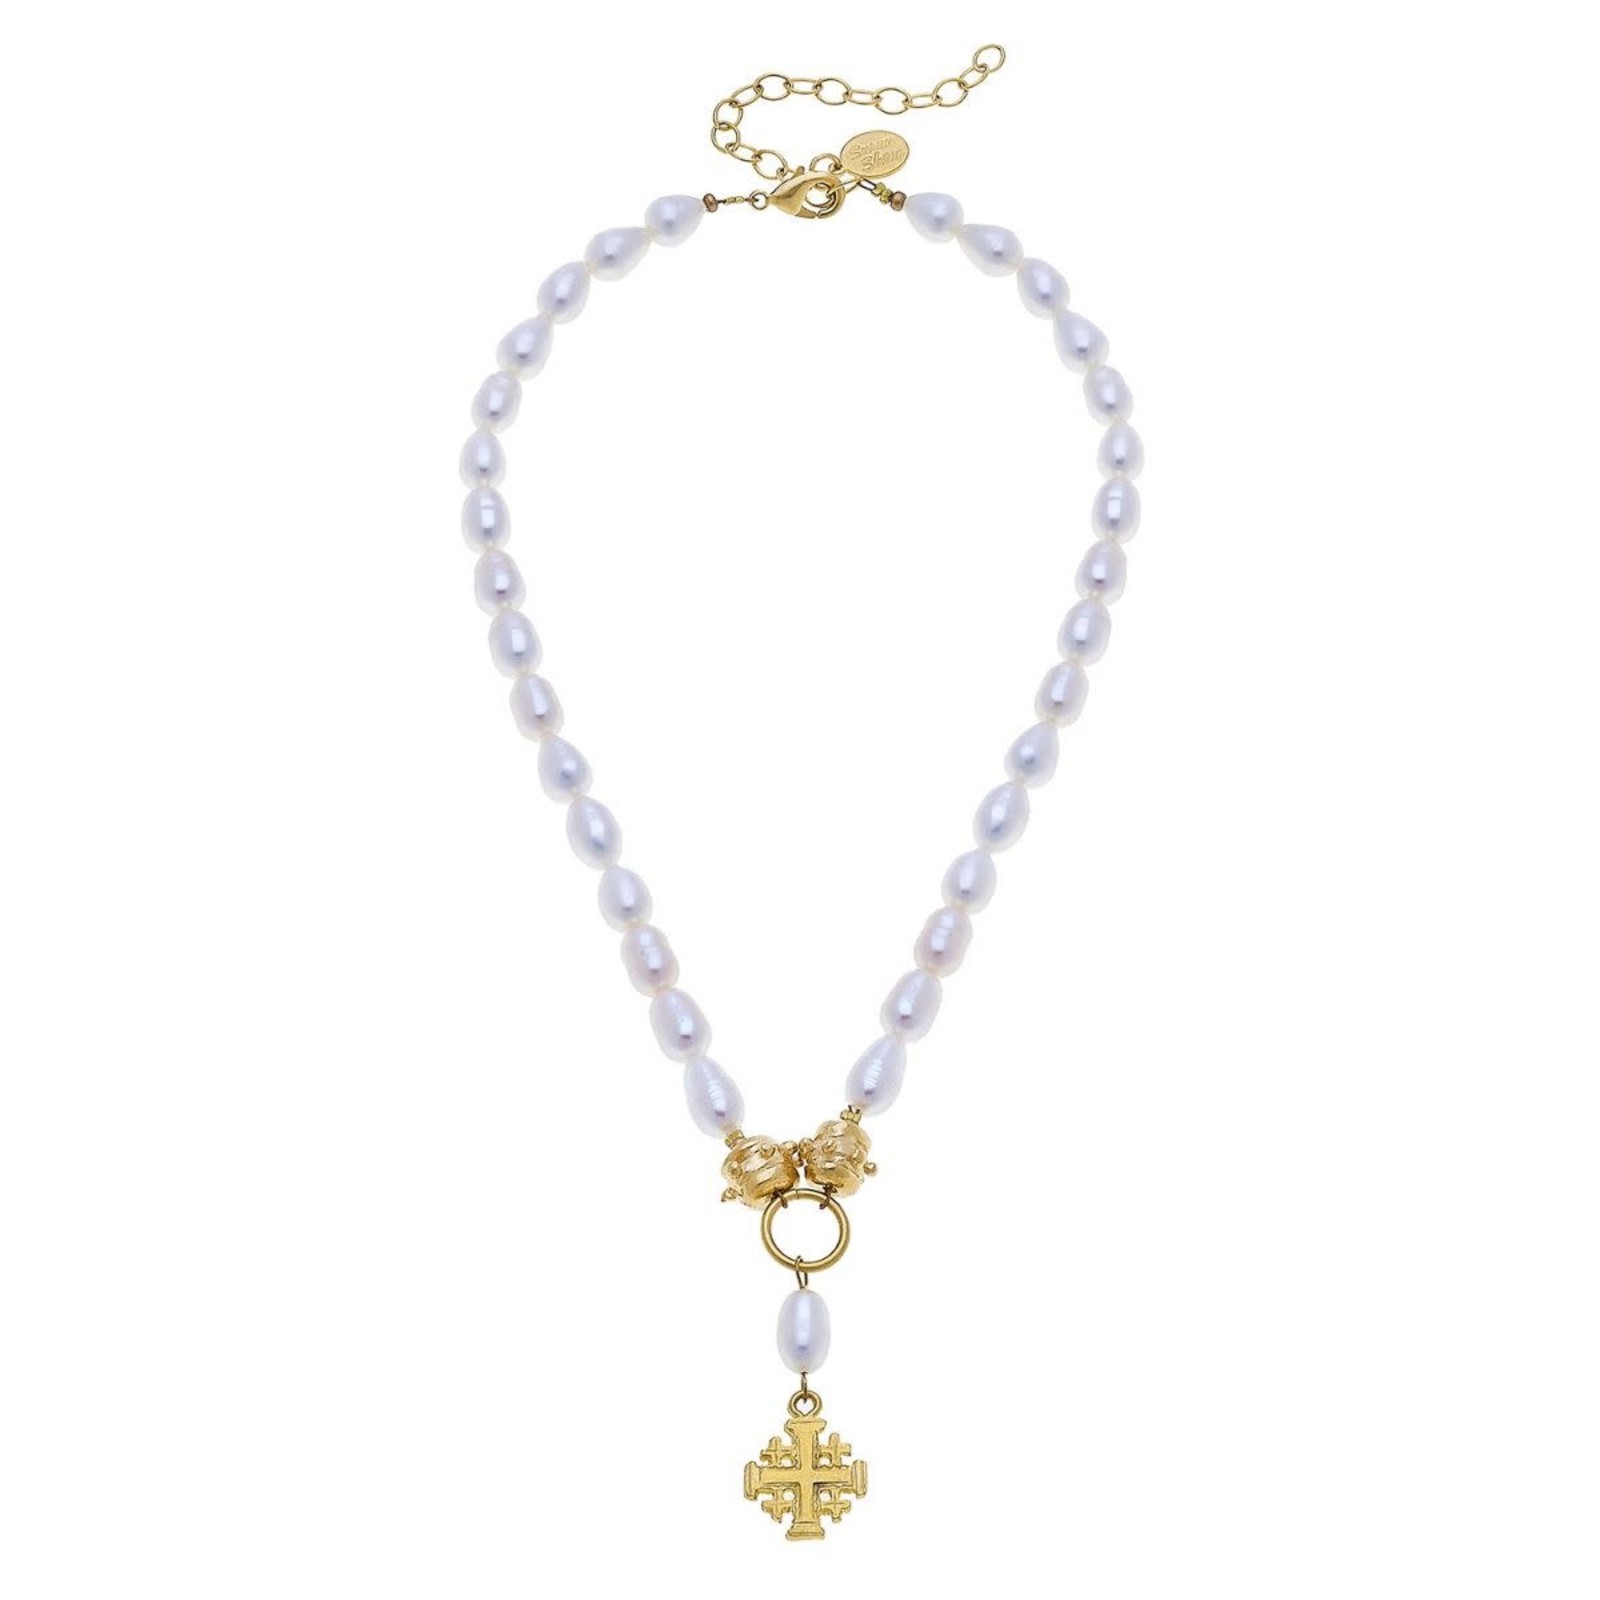 Susan Shaw Gold Multi Cross on Genuine Freshwater Pearl Necklace3757wg loading=